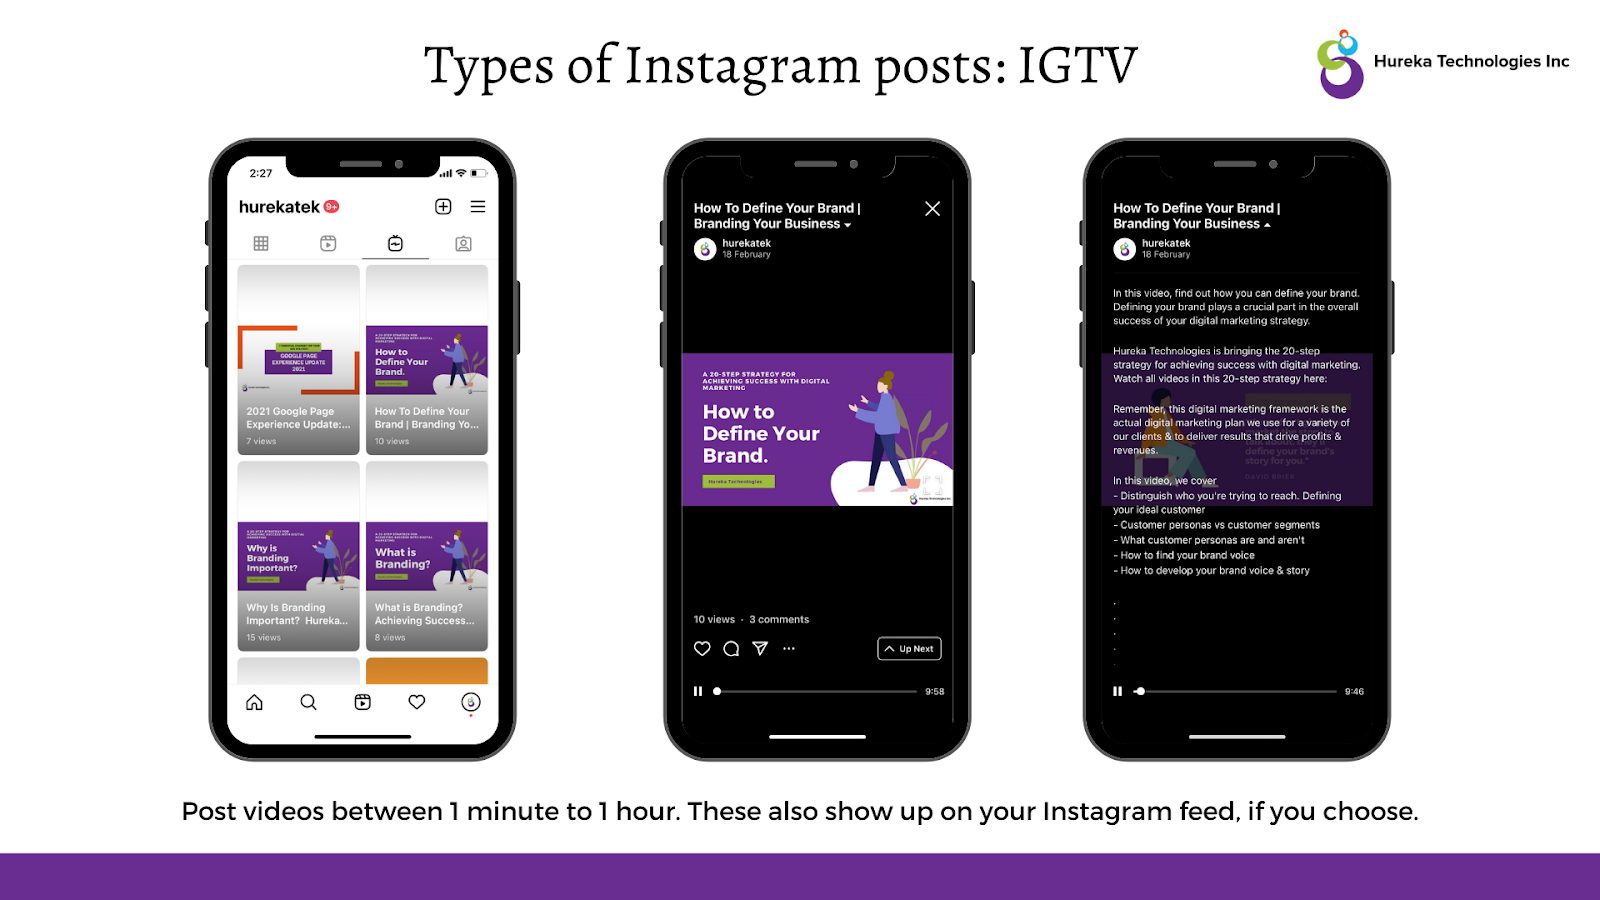 Illustration showing Instagram IGTV, how IGTV videos appear on Instagram profile page, how IGTV videos can be viewed in the IGTV section and what the description of IGTV video looks like